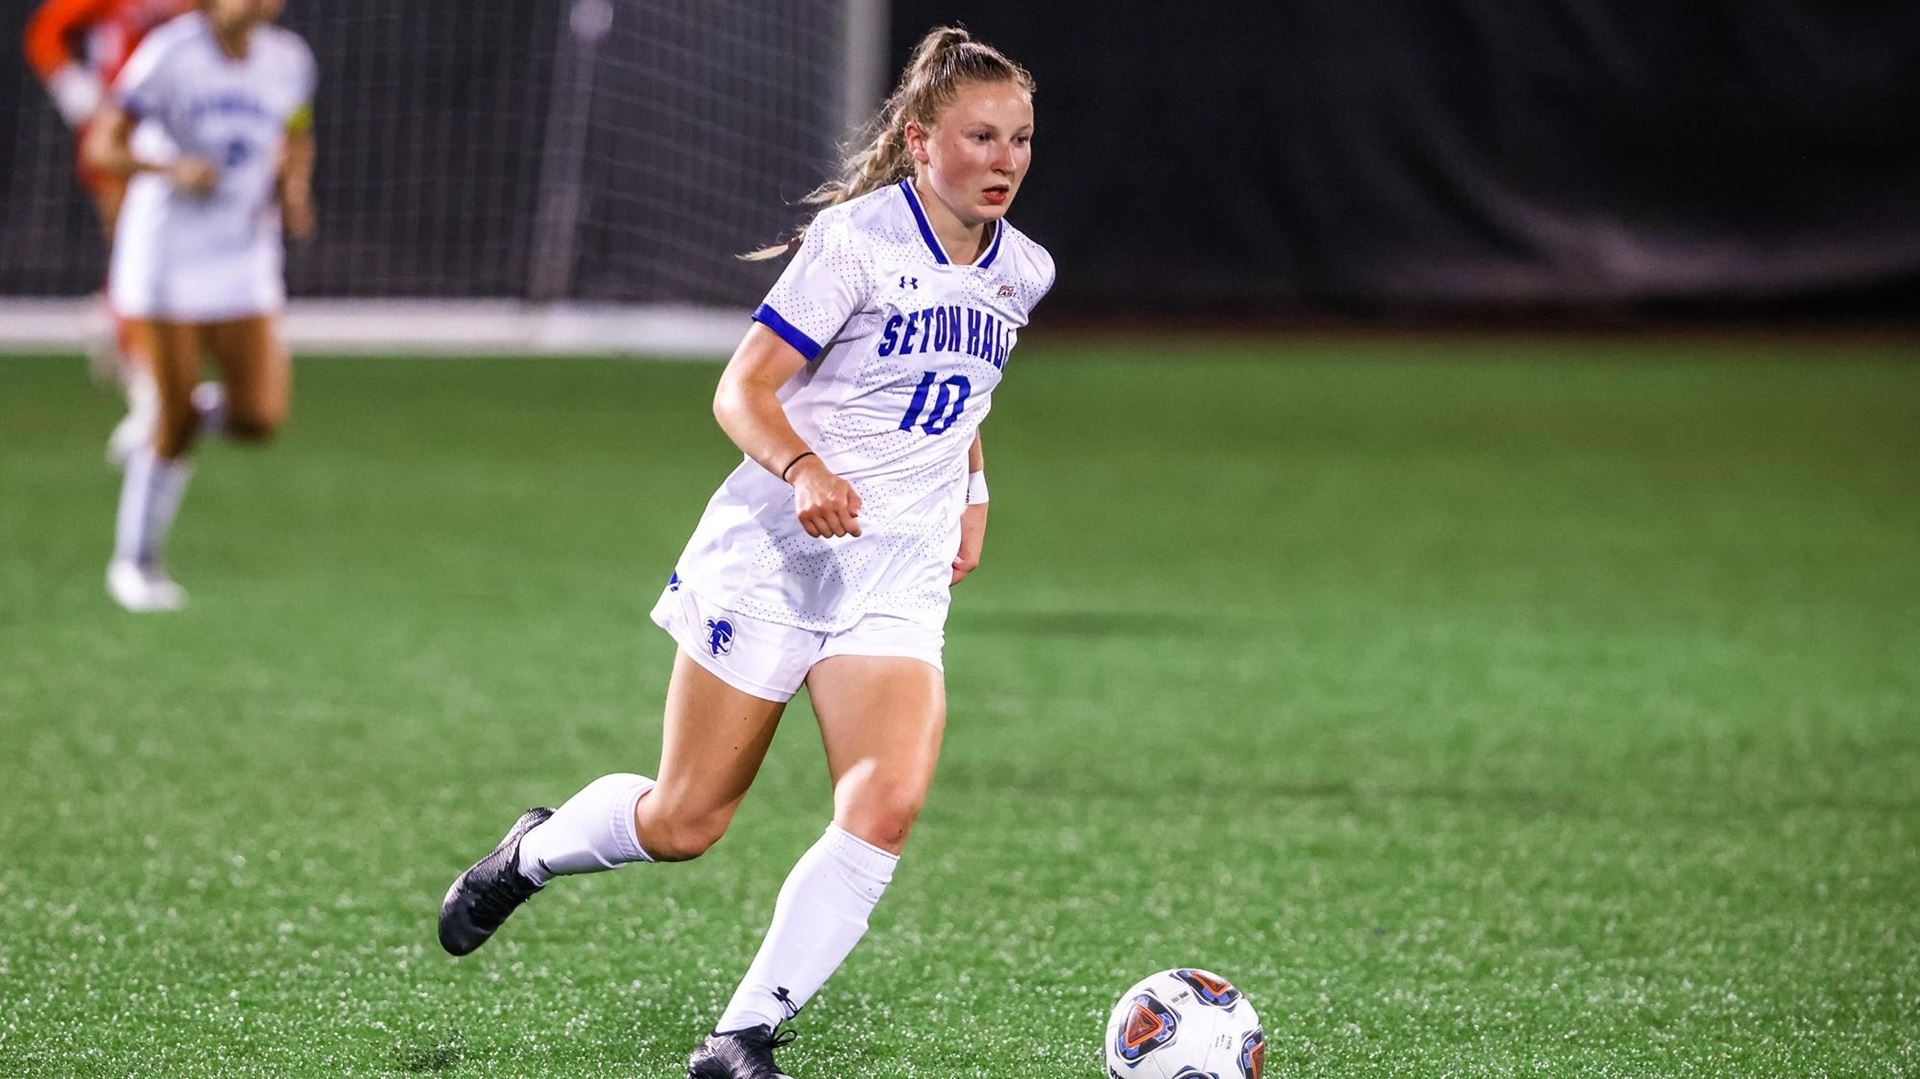 A Seton Hall women's soccer player dribbles the ball during a home game against the DePaul Blue Demons.